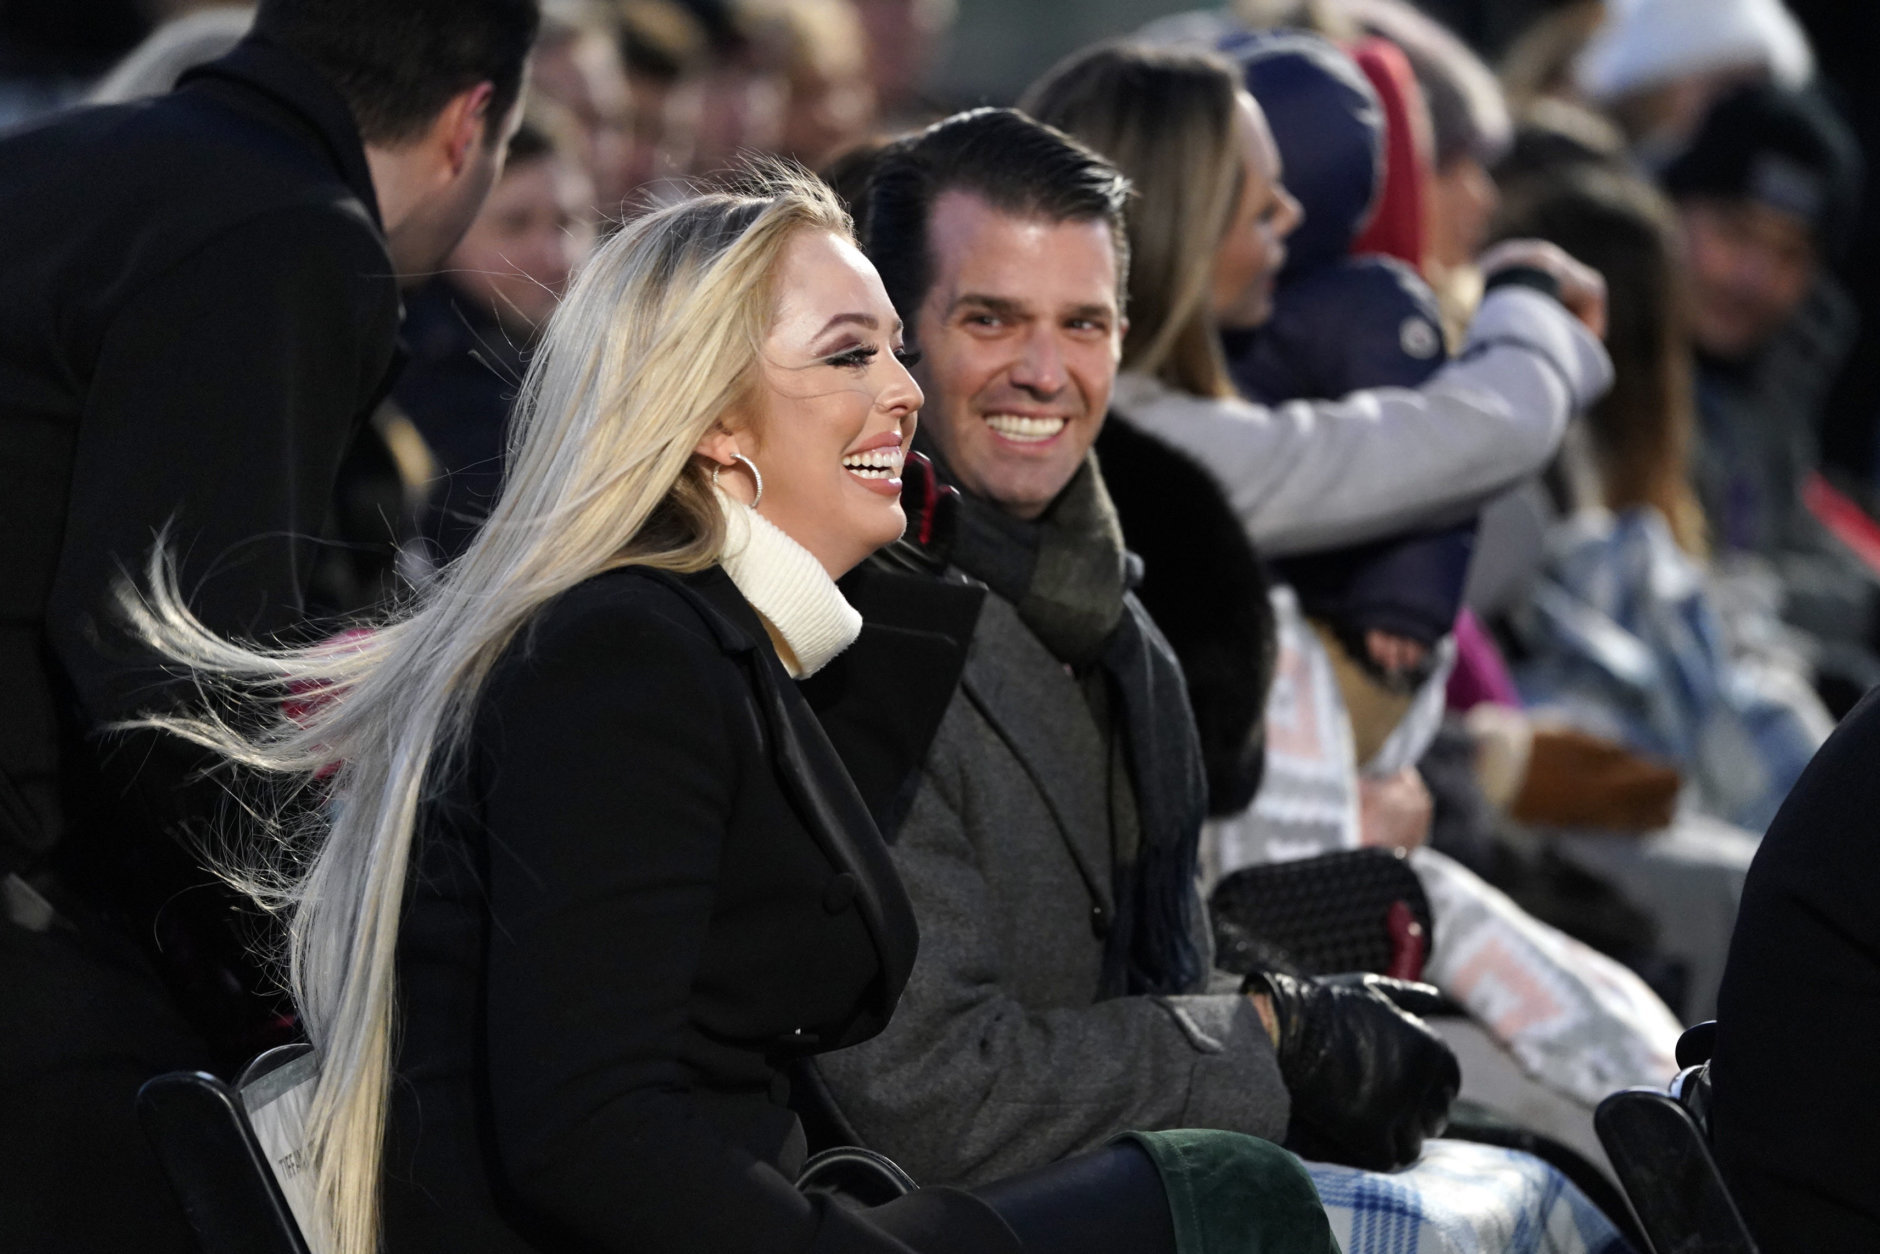 Donald Trump Jr. and Tiffany Trump arrive before President Donald Trump and first lady Melania Trump light the National Christmas Tree on the Ellipse near the White House in Washington, Wednesday, Nov. 28, 2018. (AP Photo/Andrew Harnik)